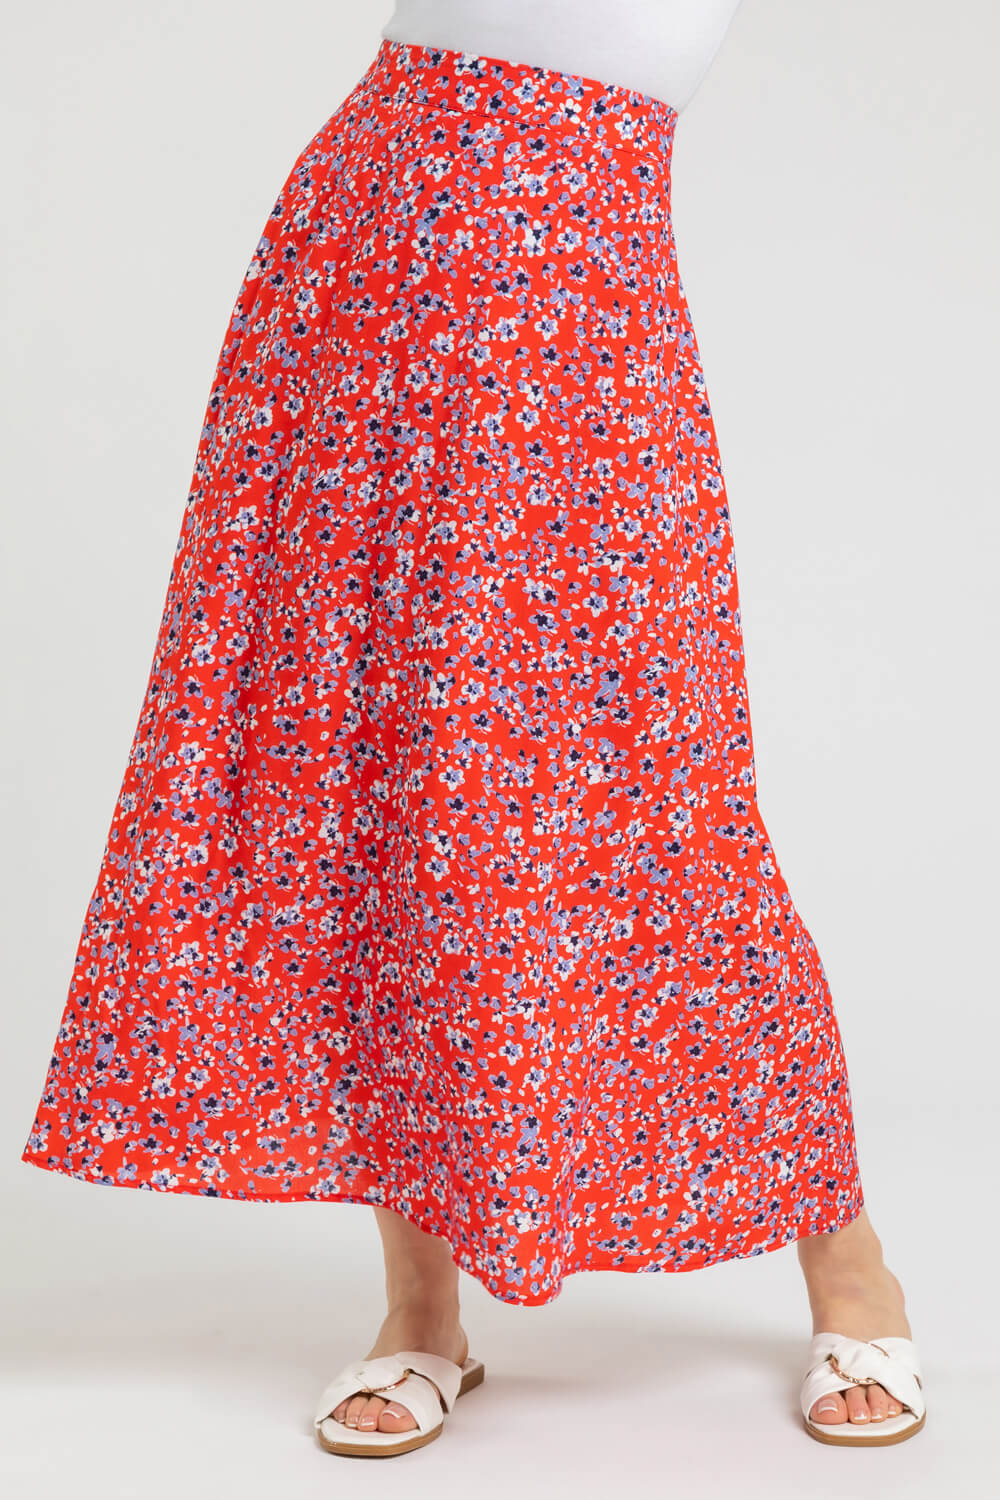 Red Petite Ditsy Floral A-Line Skirt, Image 2 of 4